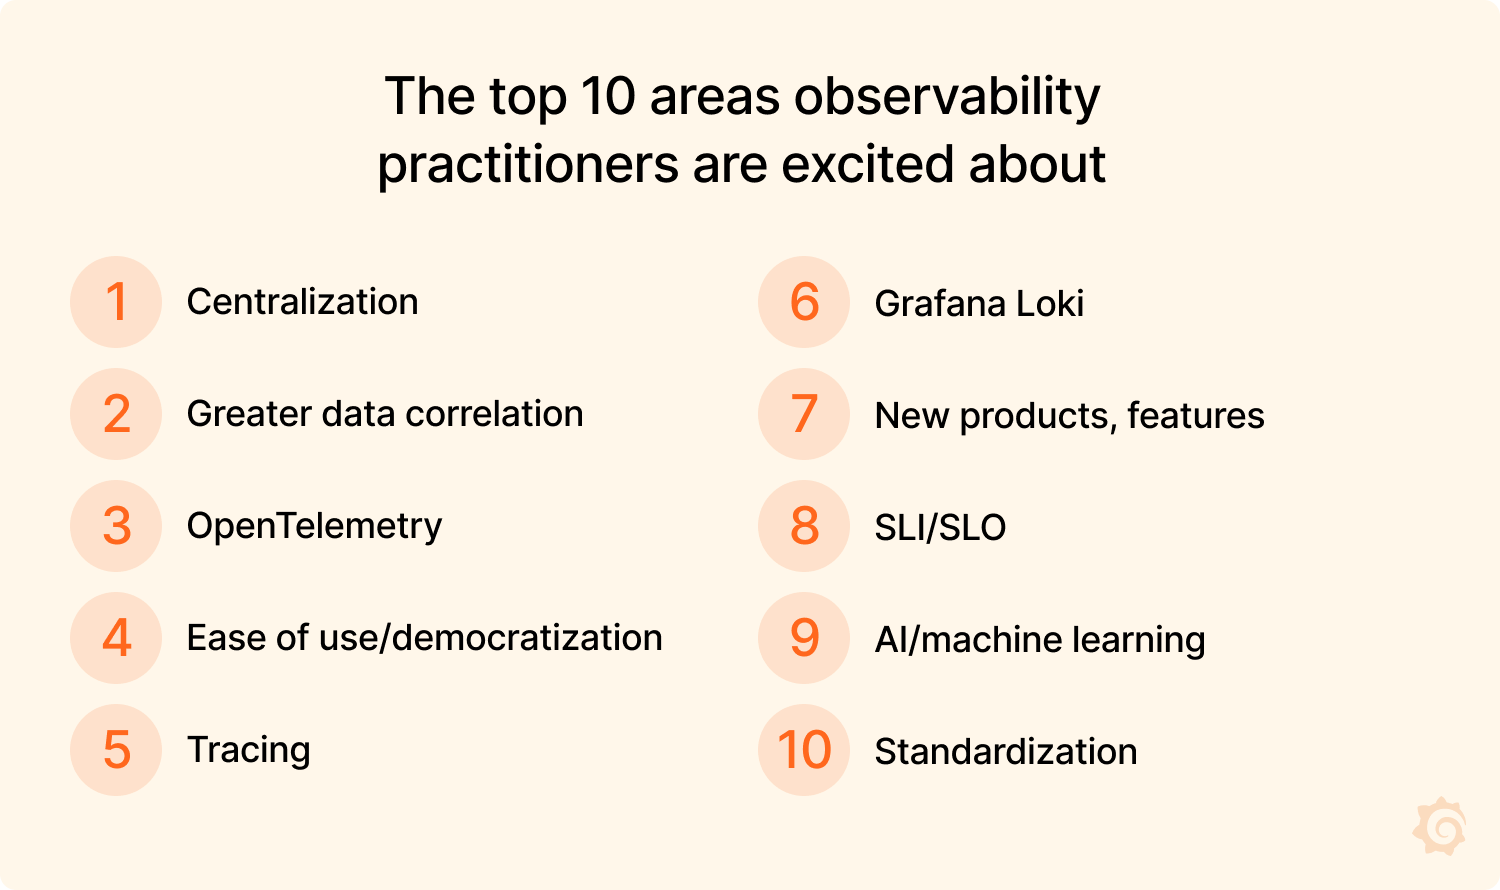 List of top 10 areas observability practitioners are excited about.